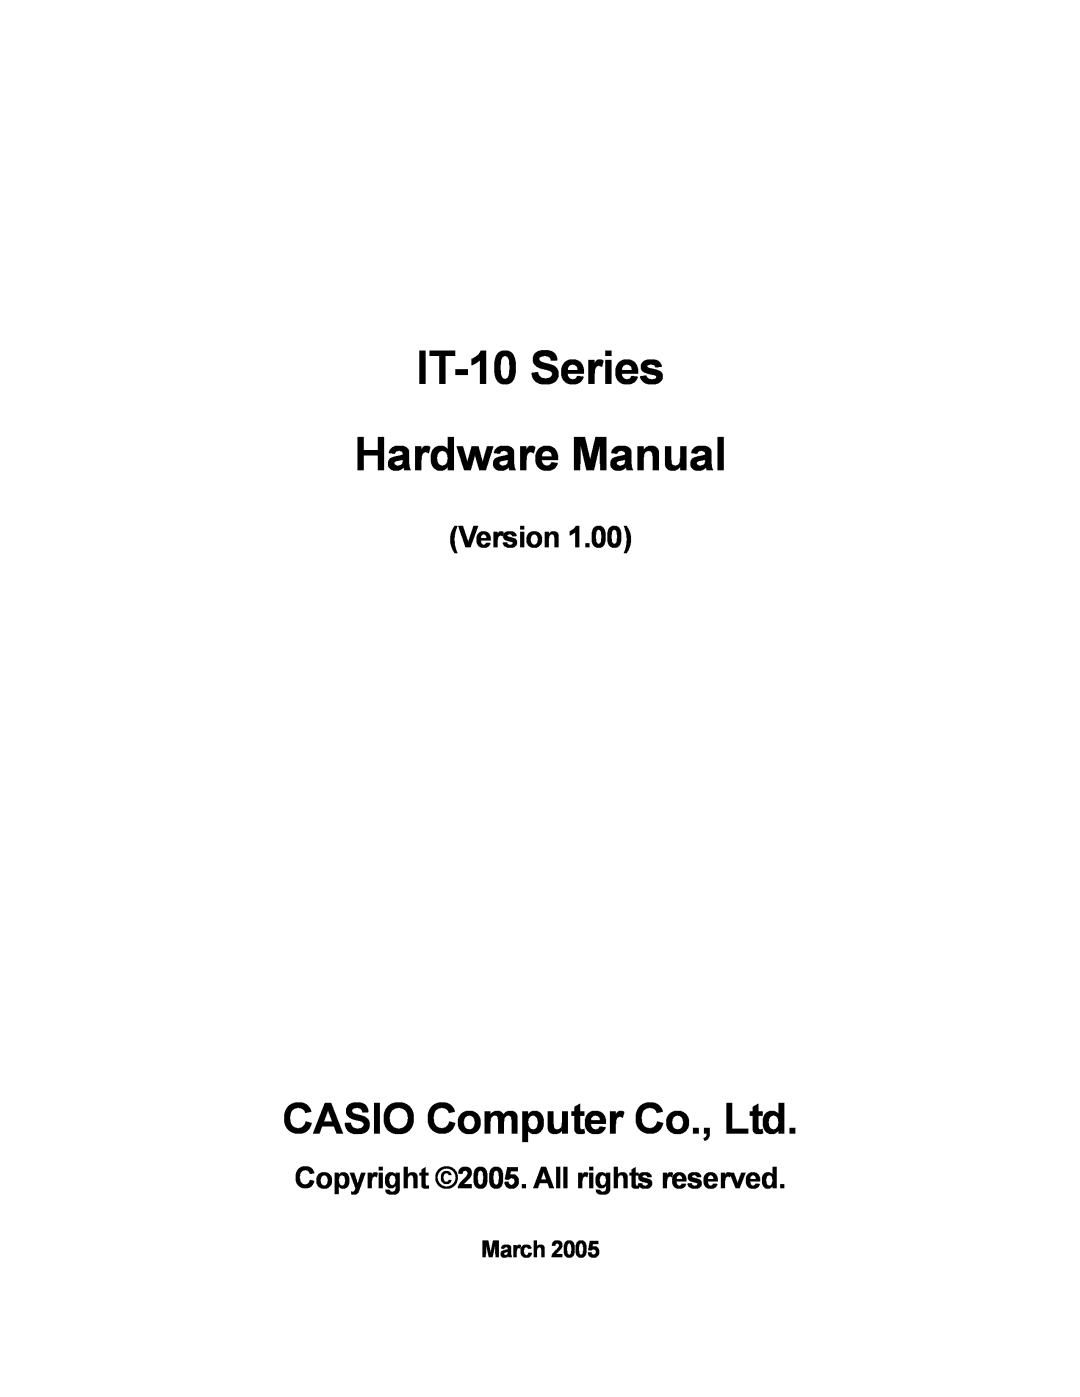 Casio 10M30BR, IT-10M20 manual March, IT-10 Series Hardware Manual, Version, Copyright 2005. All rights reserved 